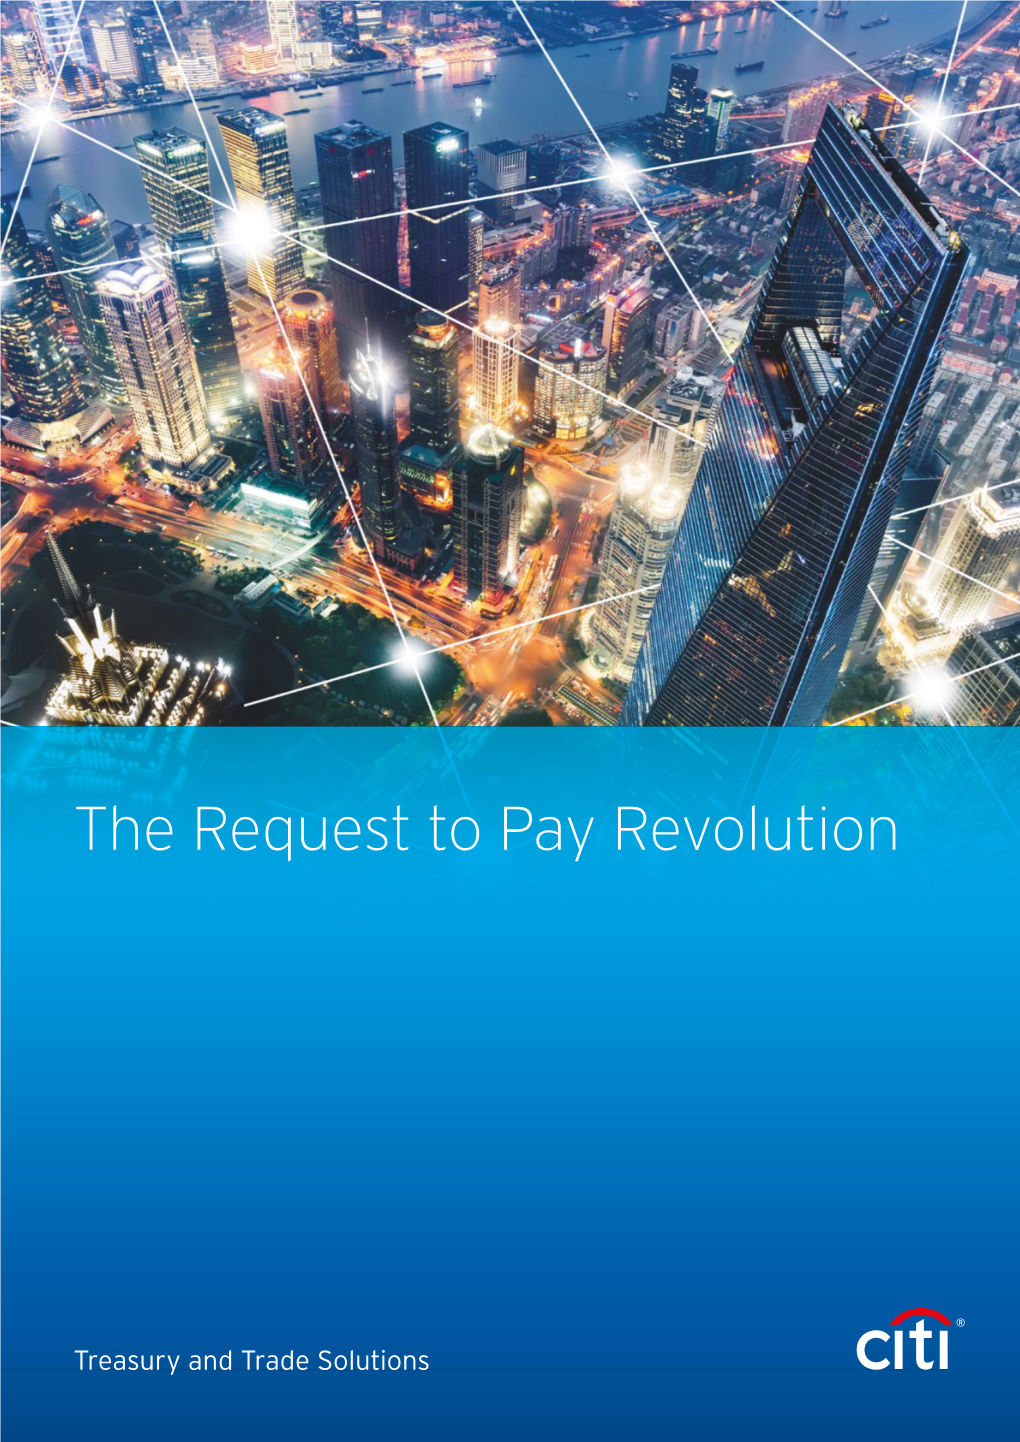 The Request to Pay Revolution